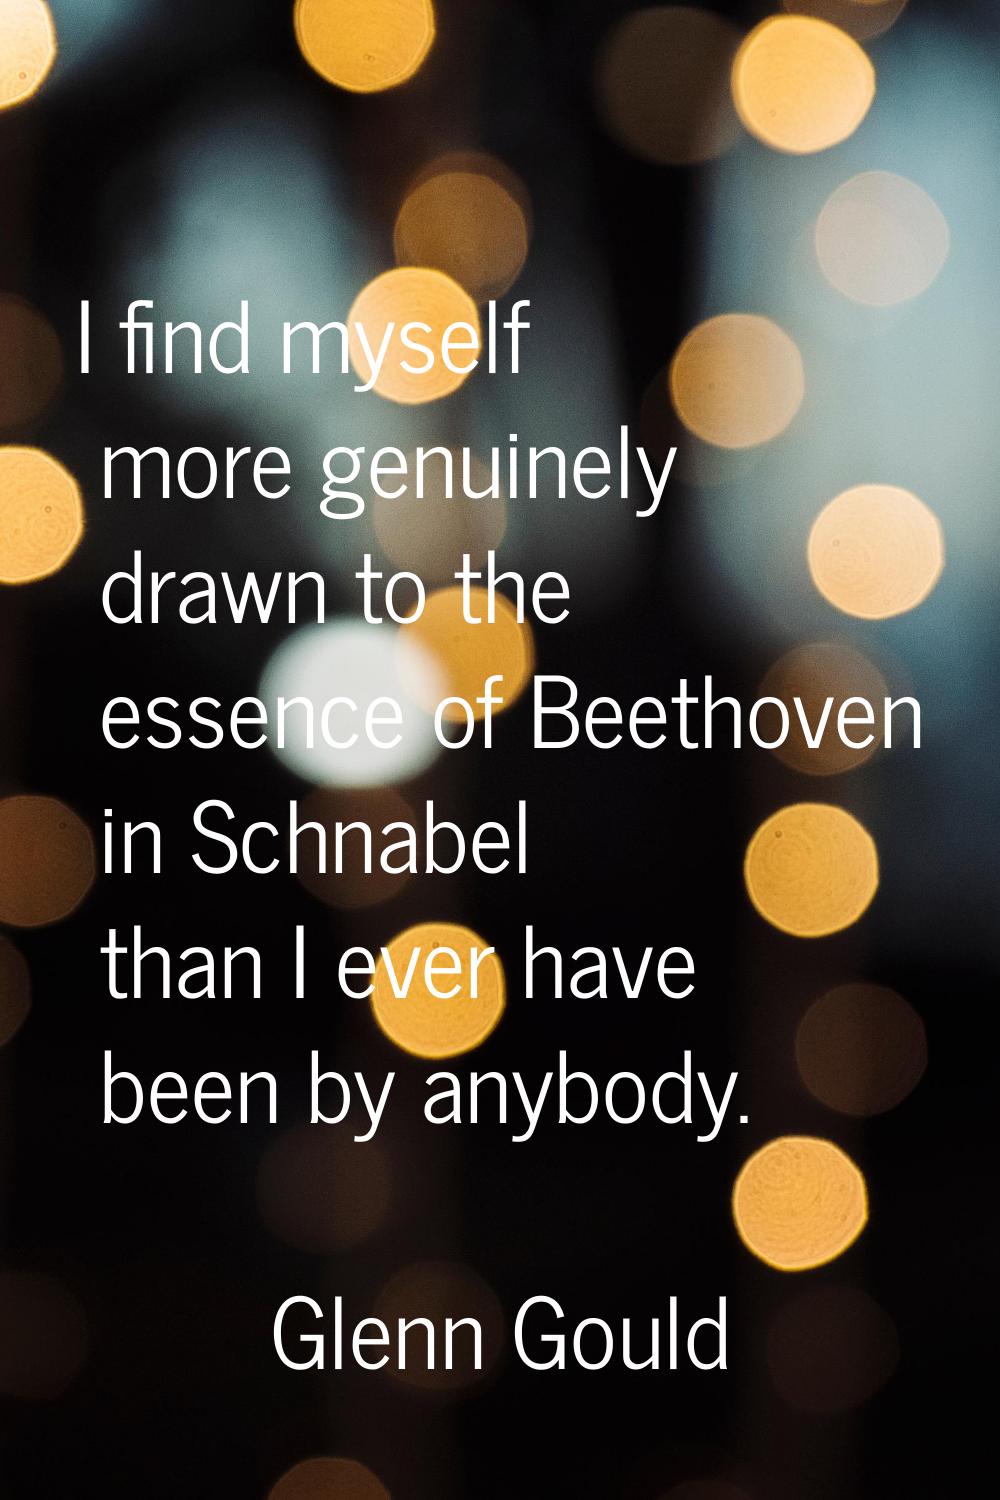 I find myself more genuinely drawn to the essence of Beethoven in Schnabel than I ever have been by